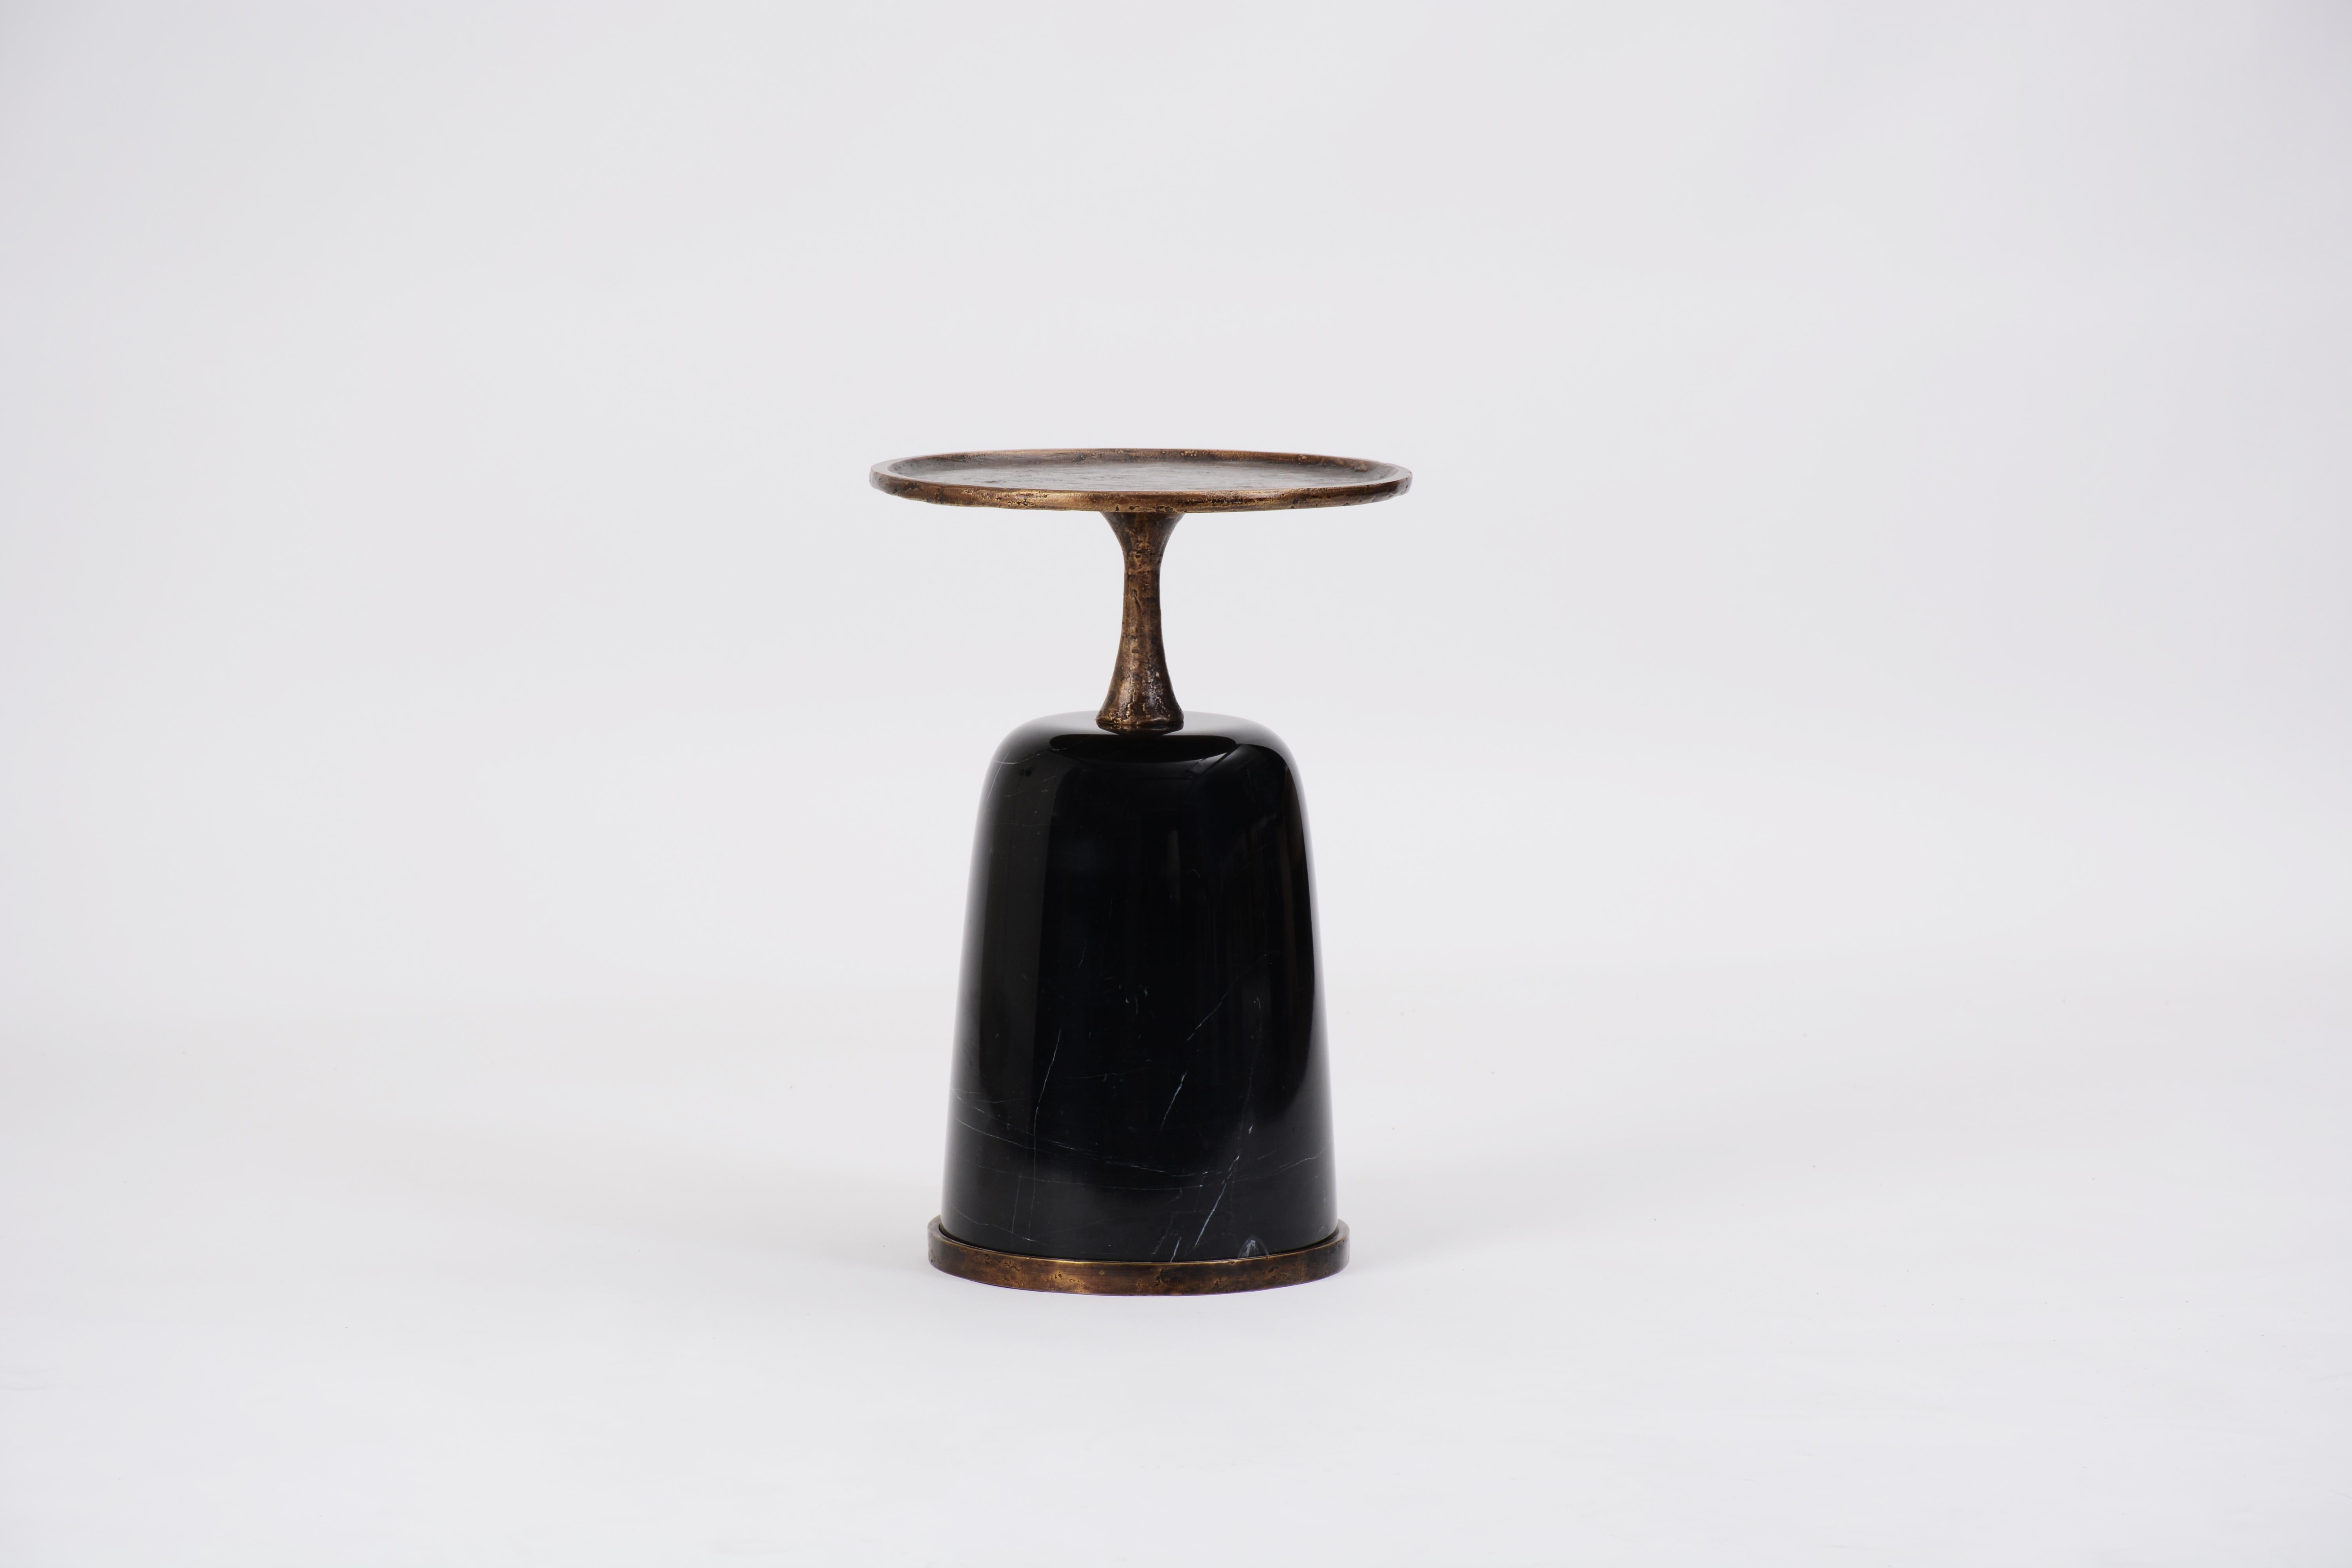 The Altai side table is a marble and bronze sculpture. Cast using the lost wax method, the textured bronze is reminiscent of a Giacometti sculpture.

The solid marble base is stocked in black but also available in white marble. Custom sizes and